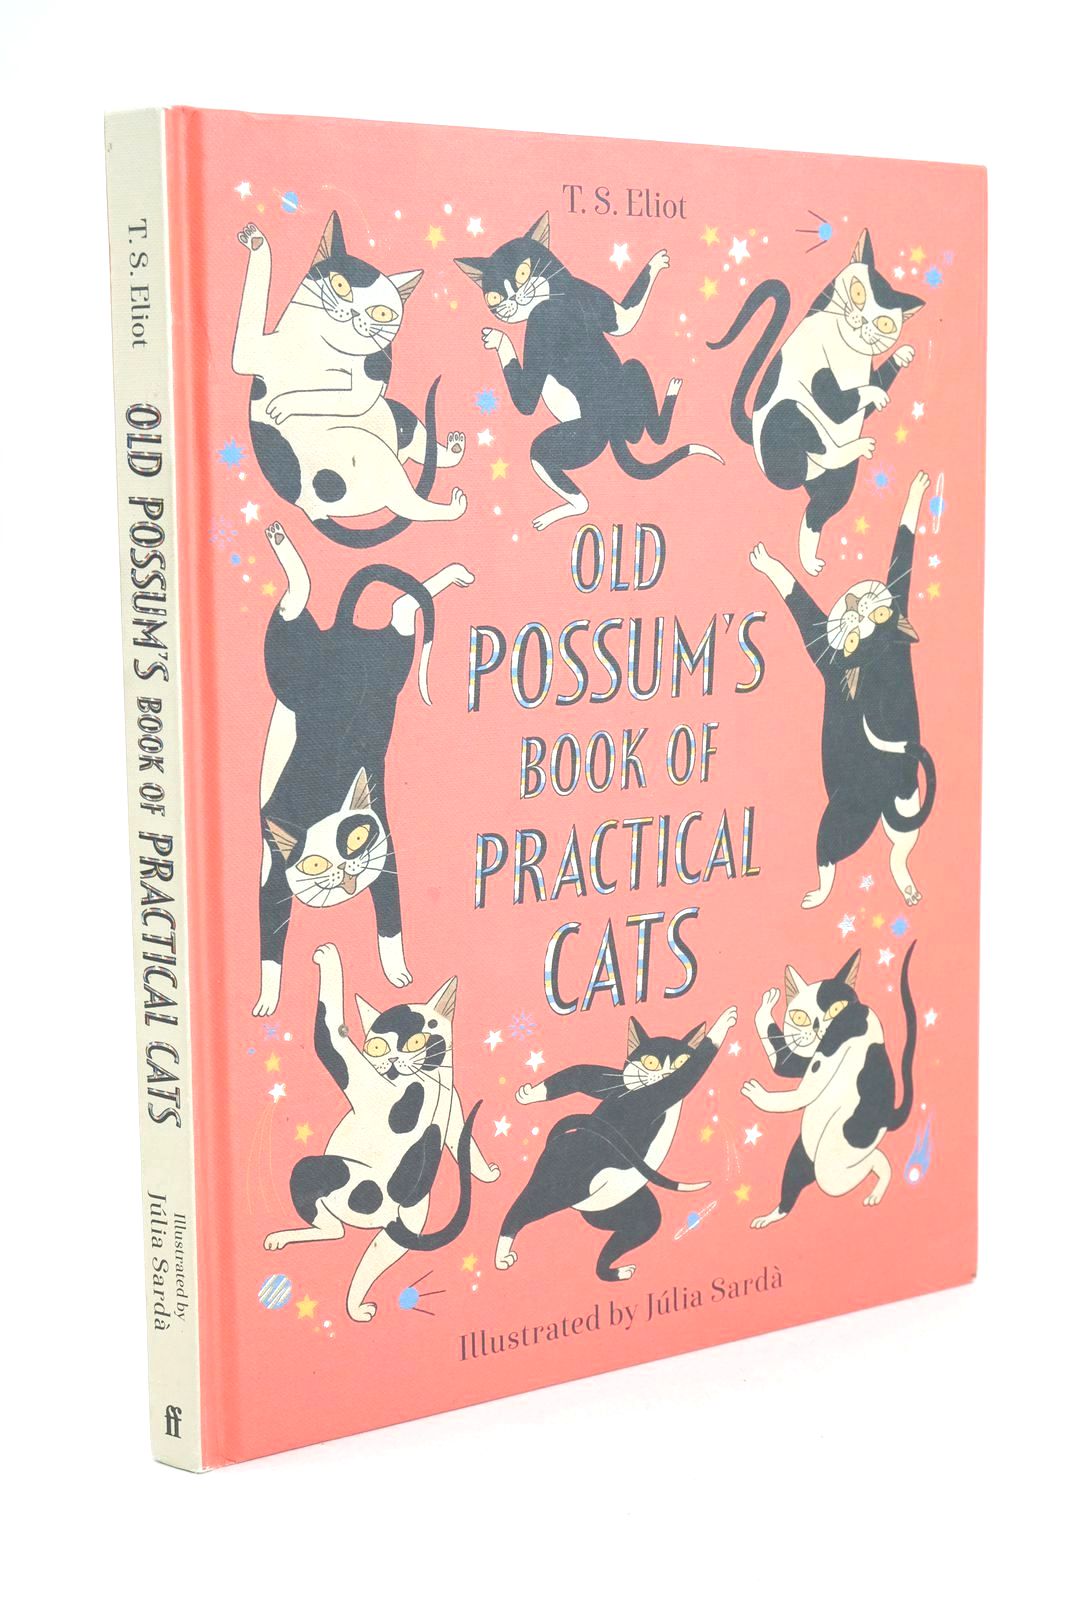 Photo of OLD POSSUM'S BOOK OF PRACTICAL CATS written by Eliot, T.S. illustrated by Sarda, Julia published by Faber &amp; Faber Limited (STOCK CODE: 1325605)  for sale by Stella & Rose's Books